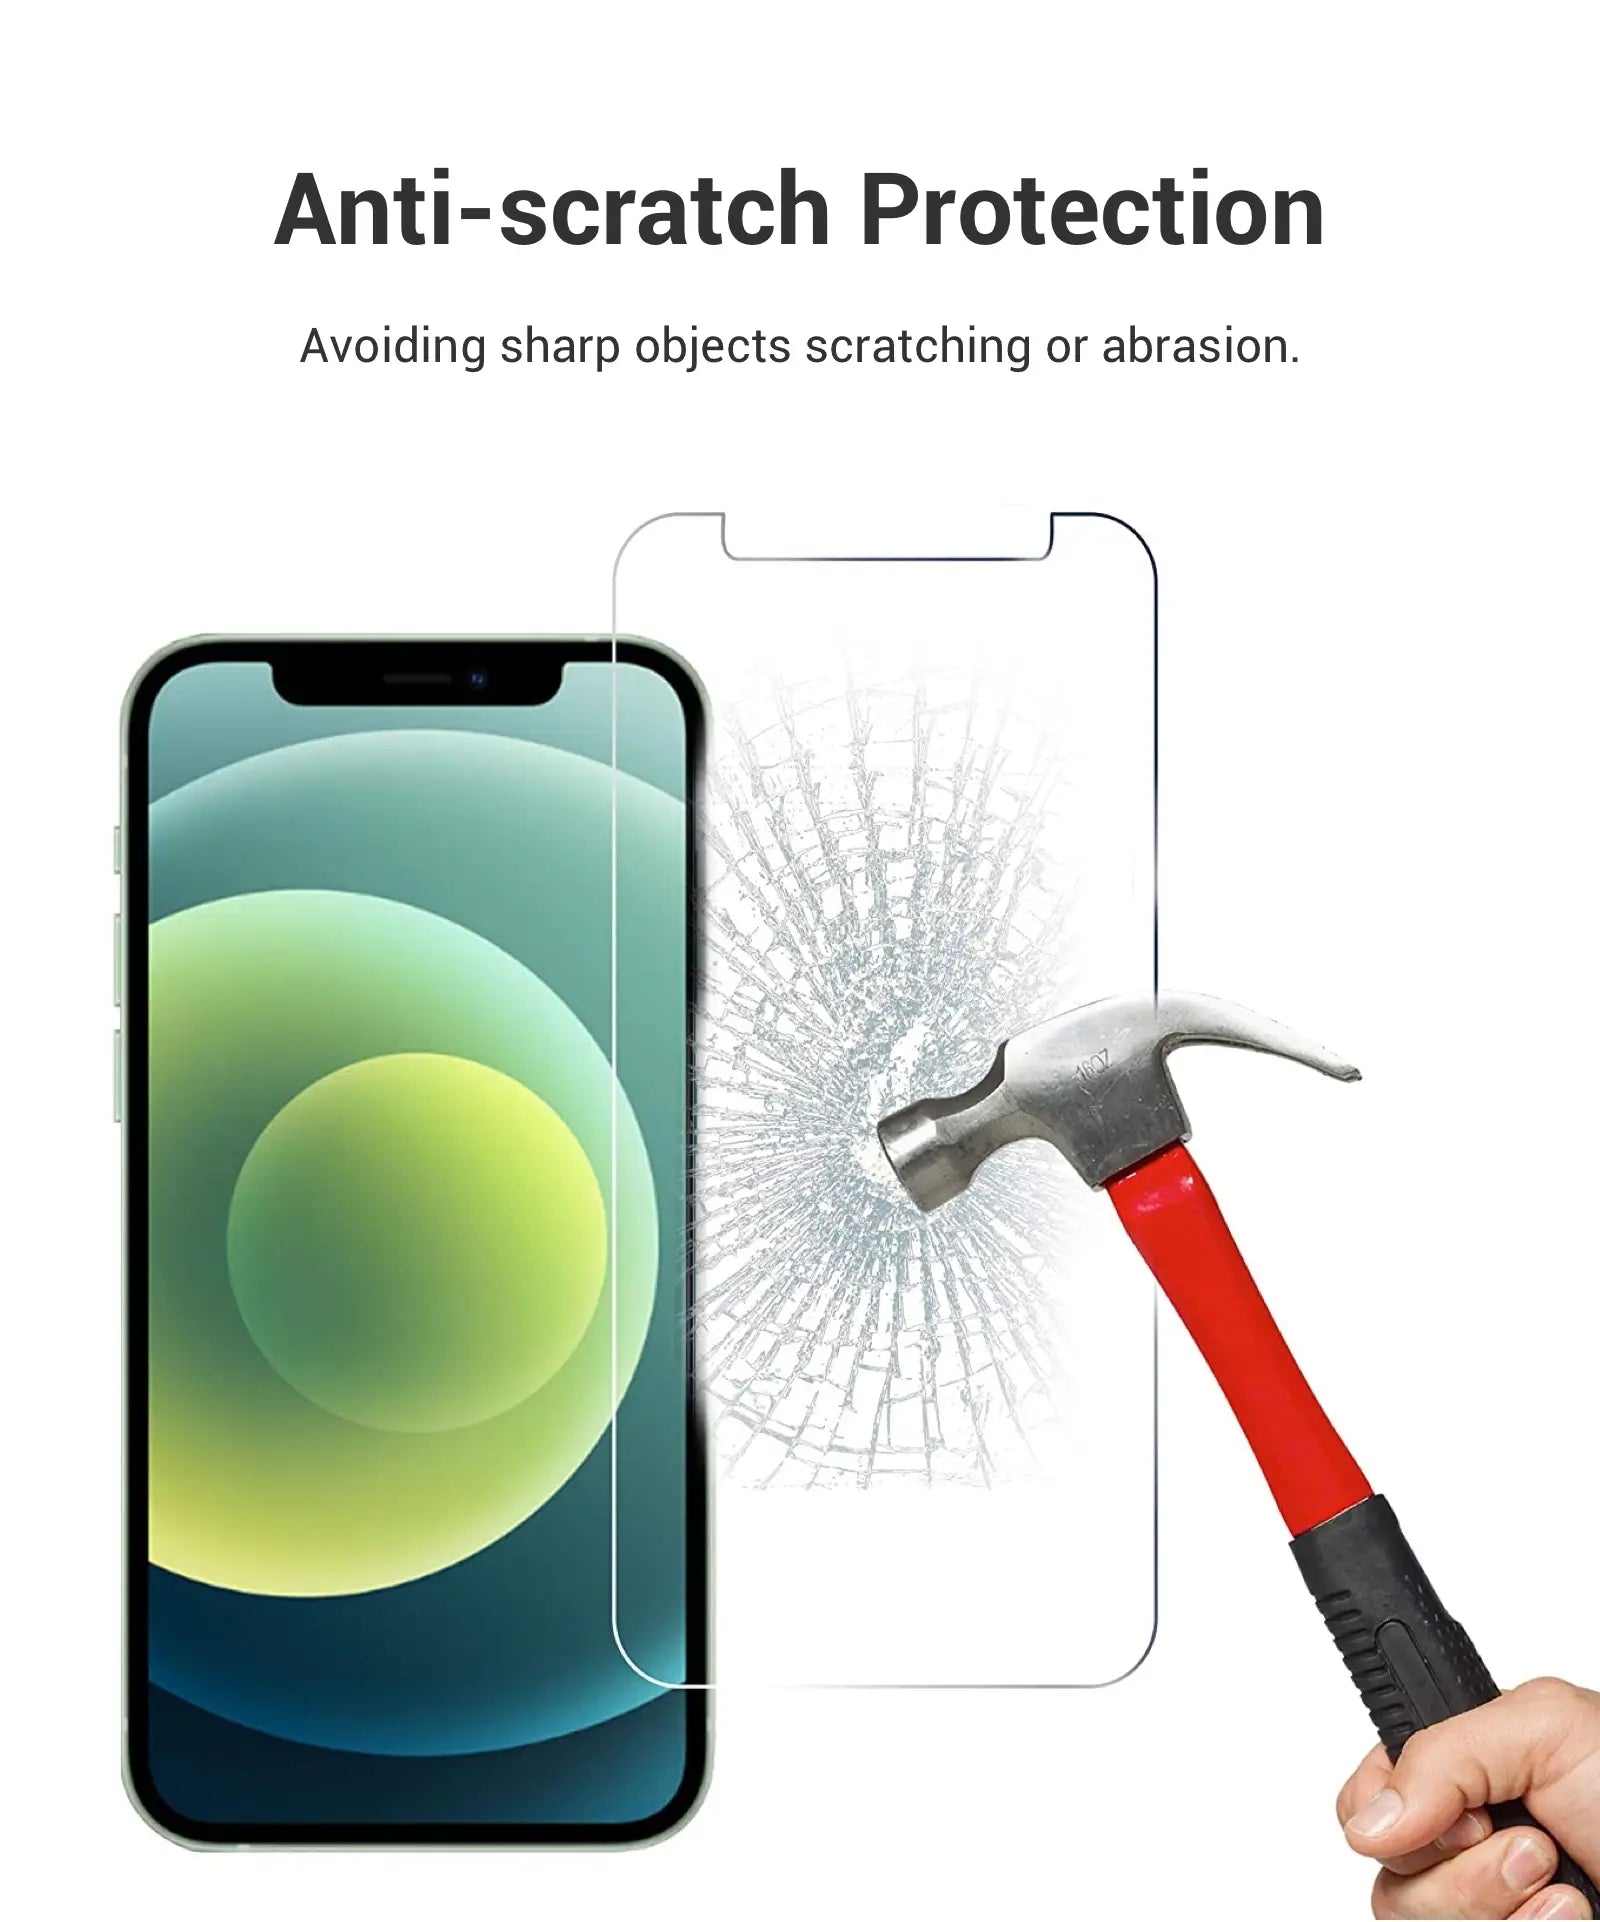 Anti-scratch Protection Avoiding sharp objects scratching or abrasion.